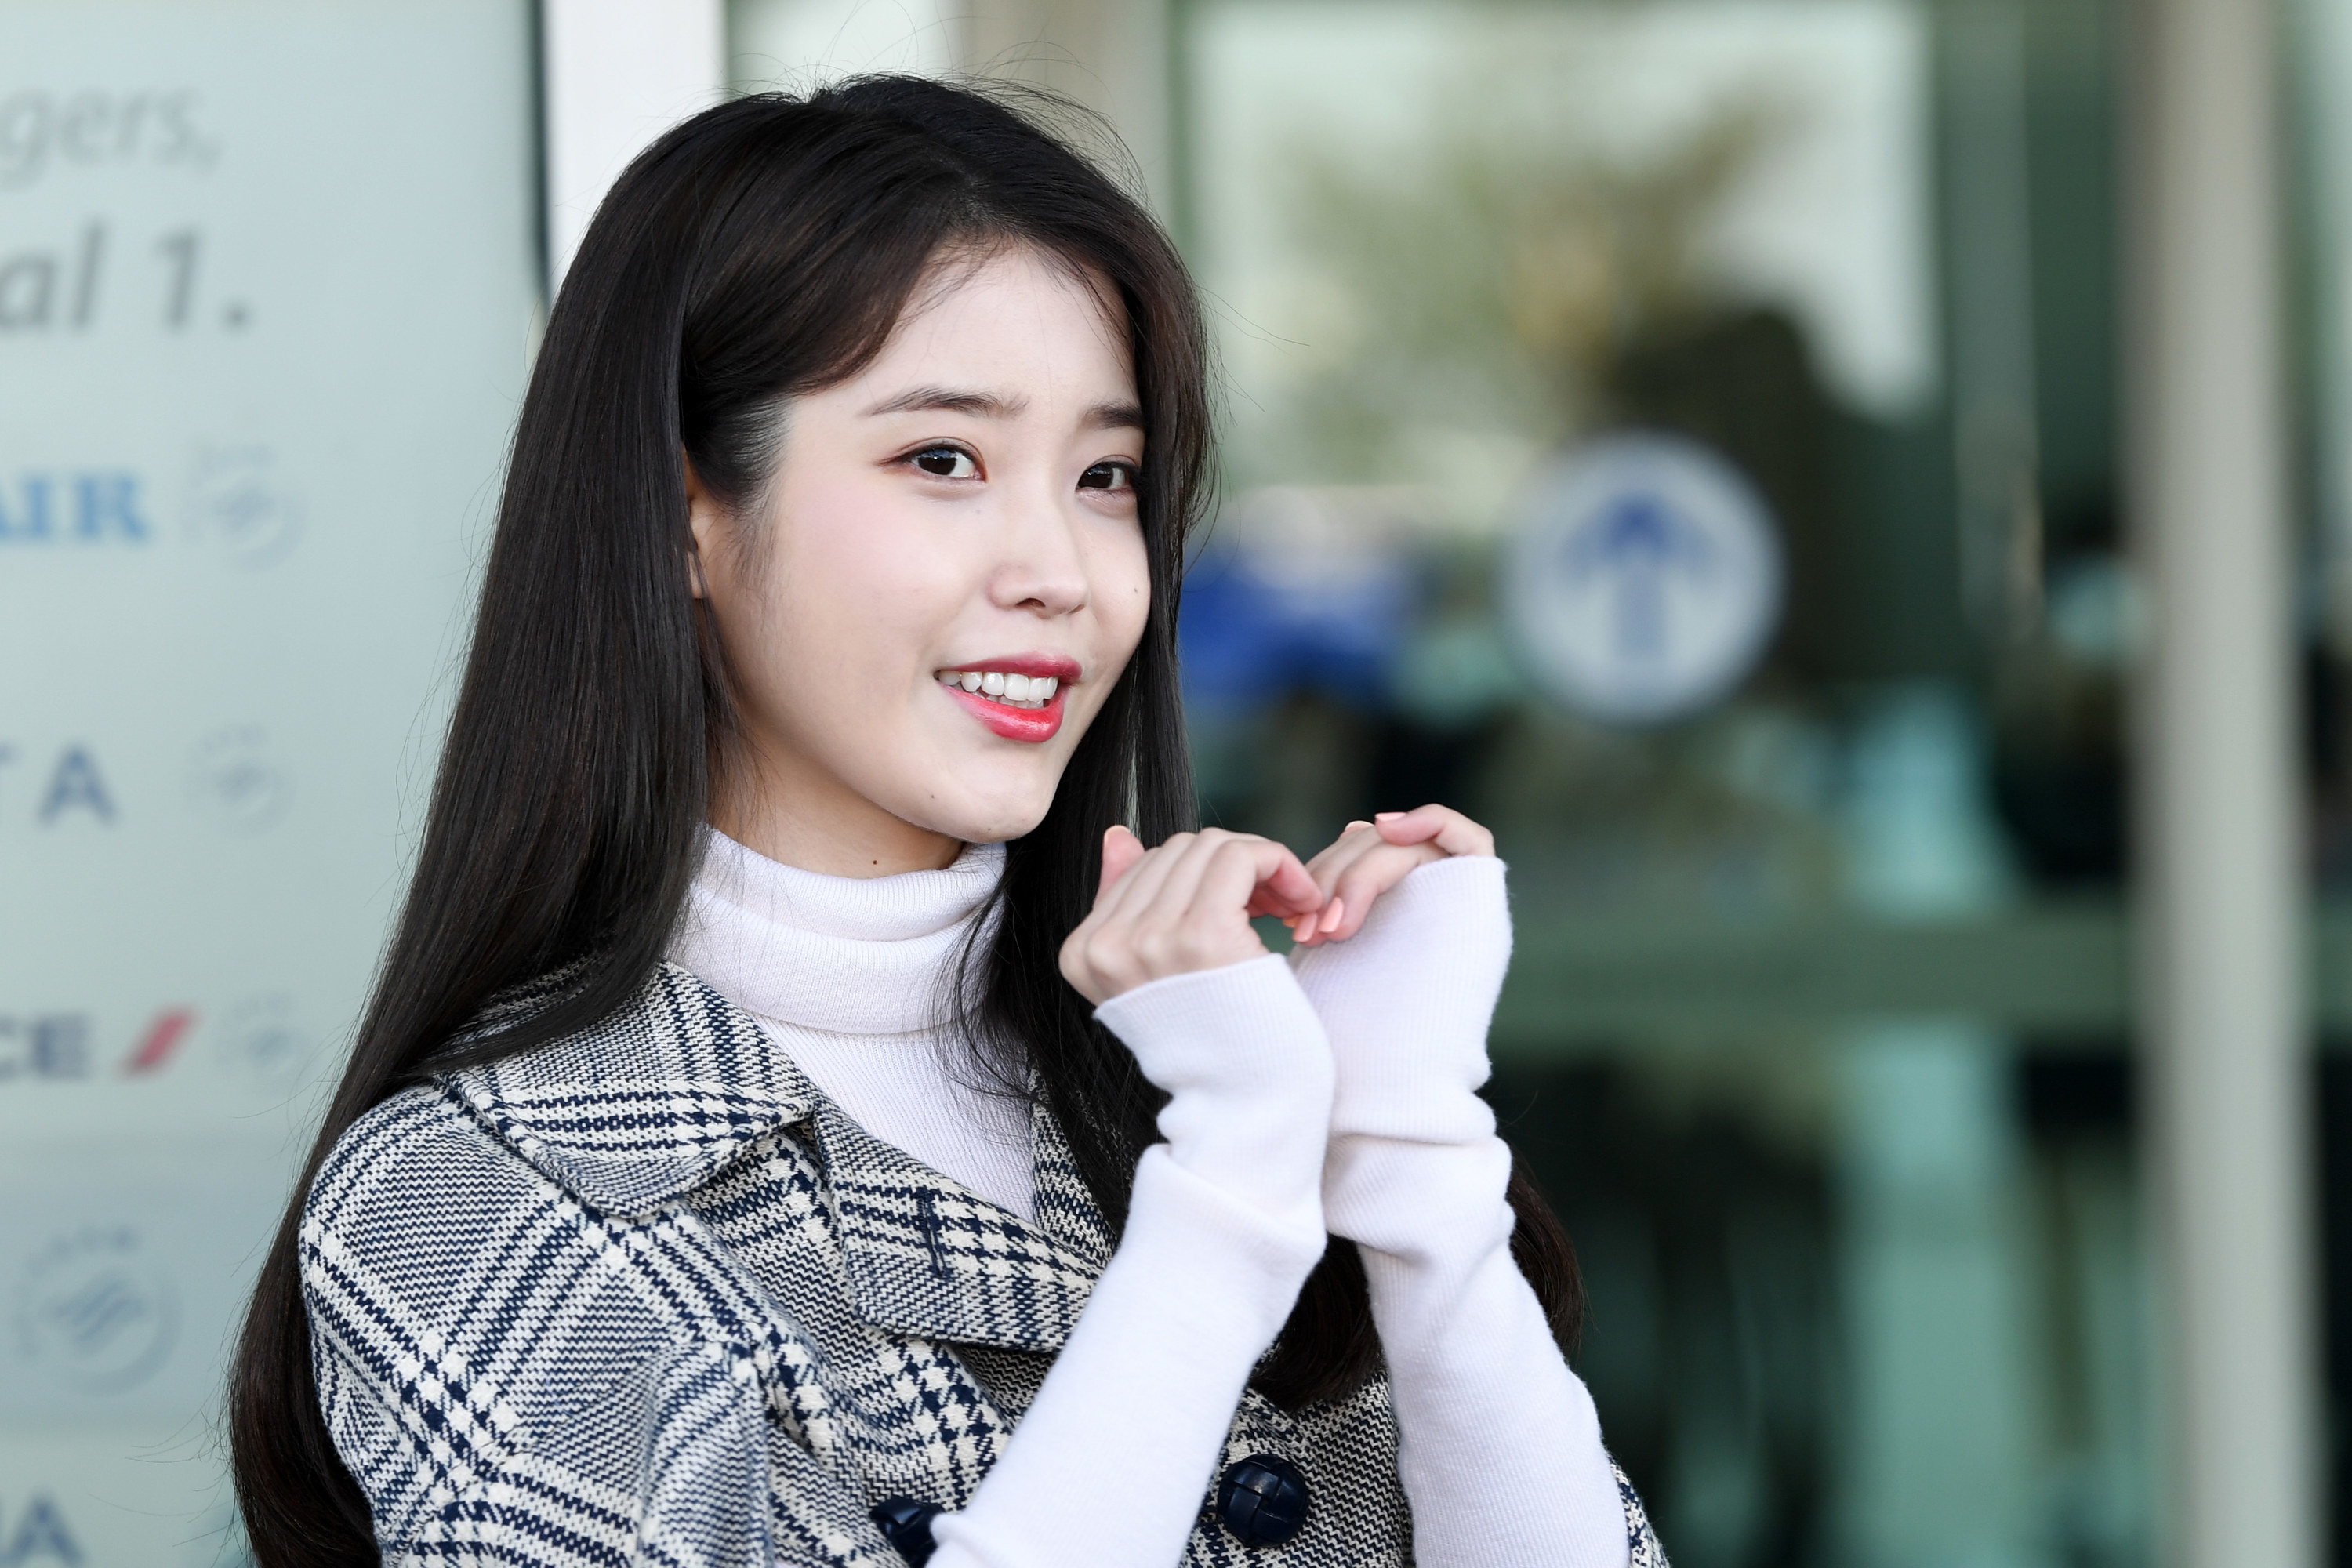 IU wears a turtleneck and plaid jacket; her hands form a heart shape in front of her, and she smiles with her long dark hair behind her shoulders